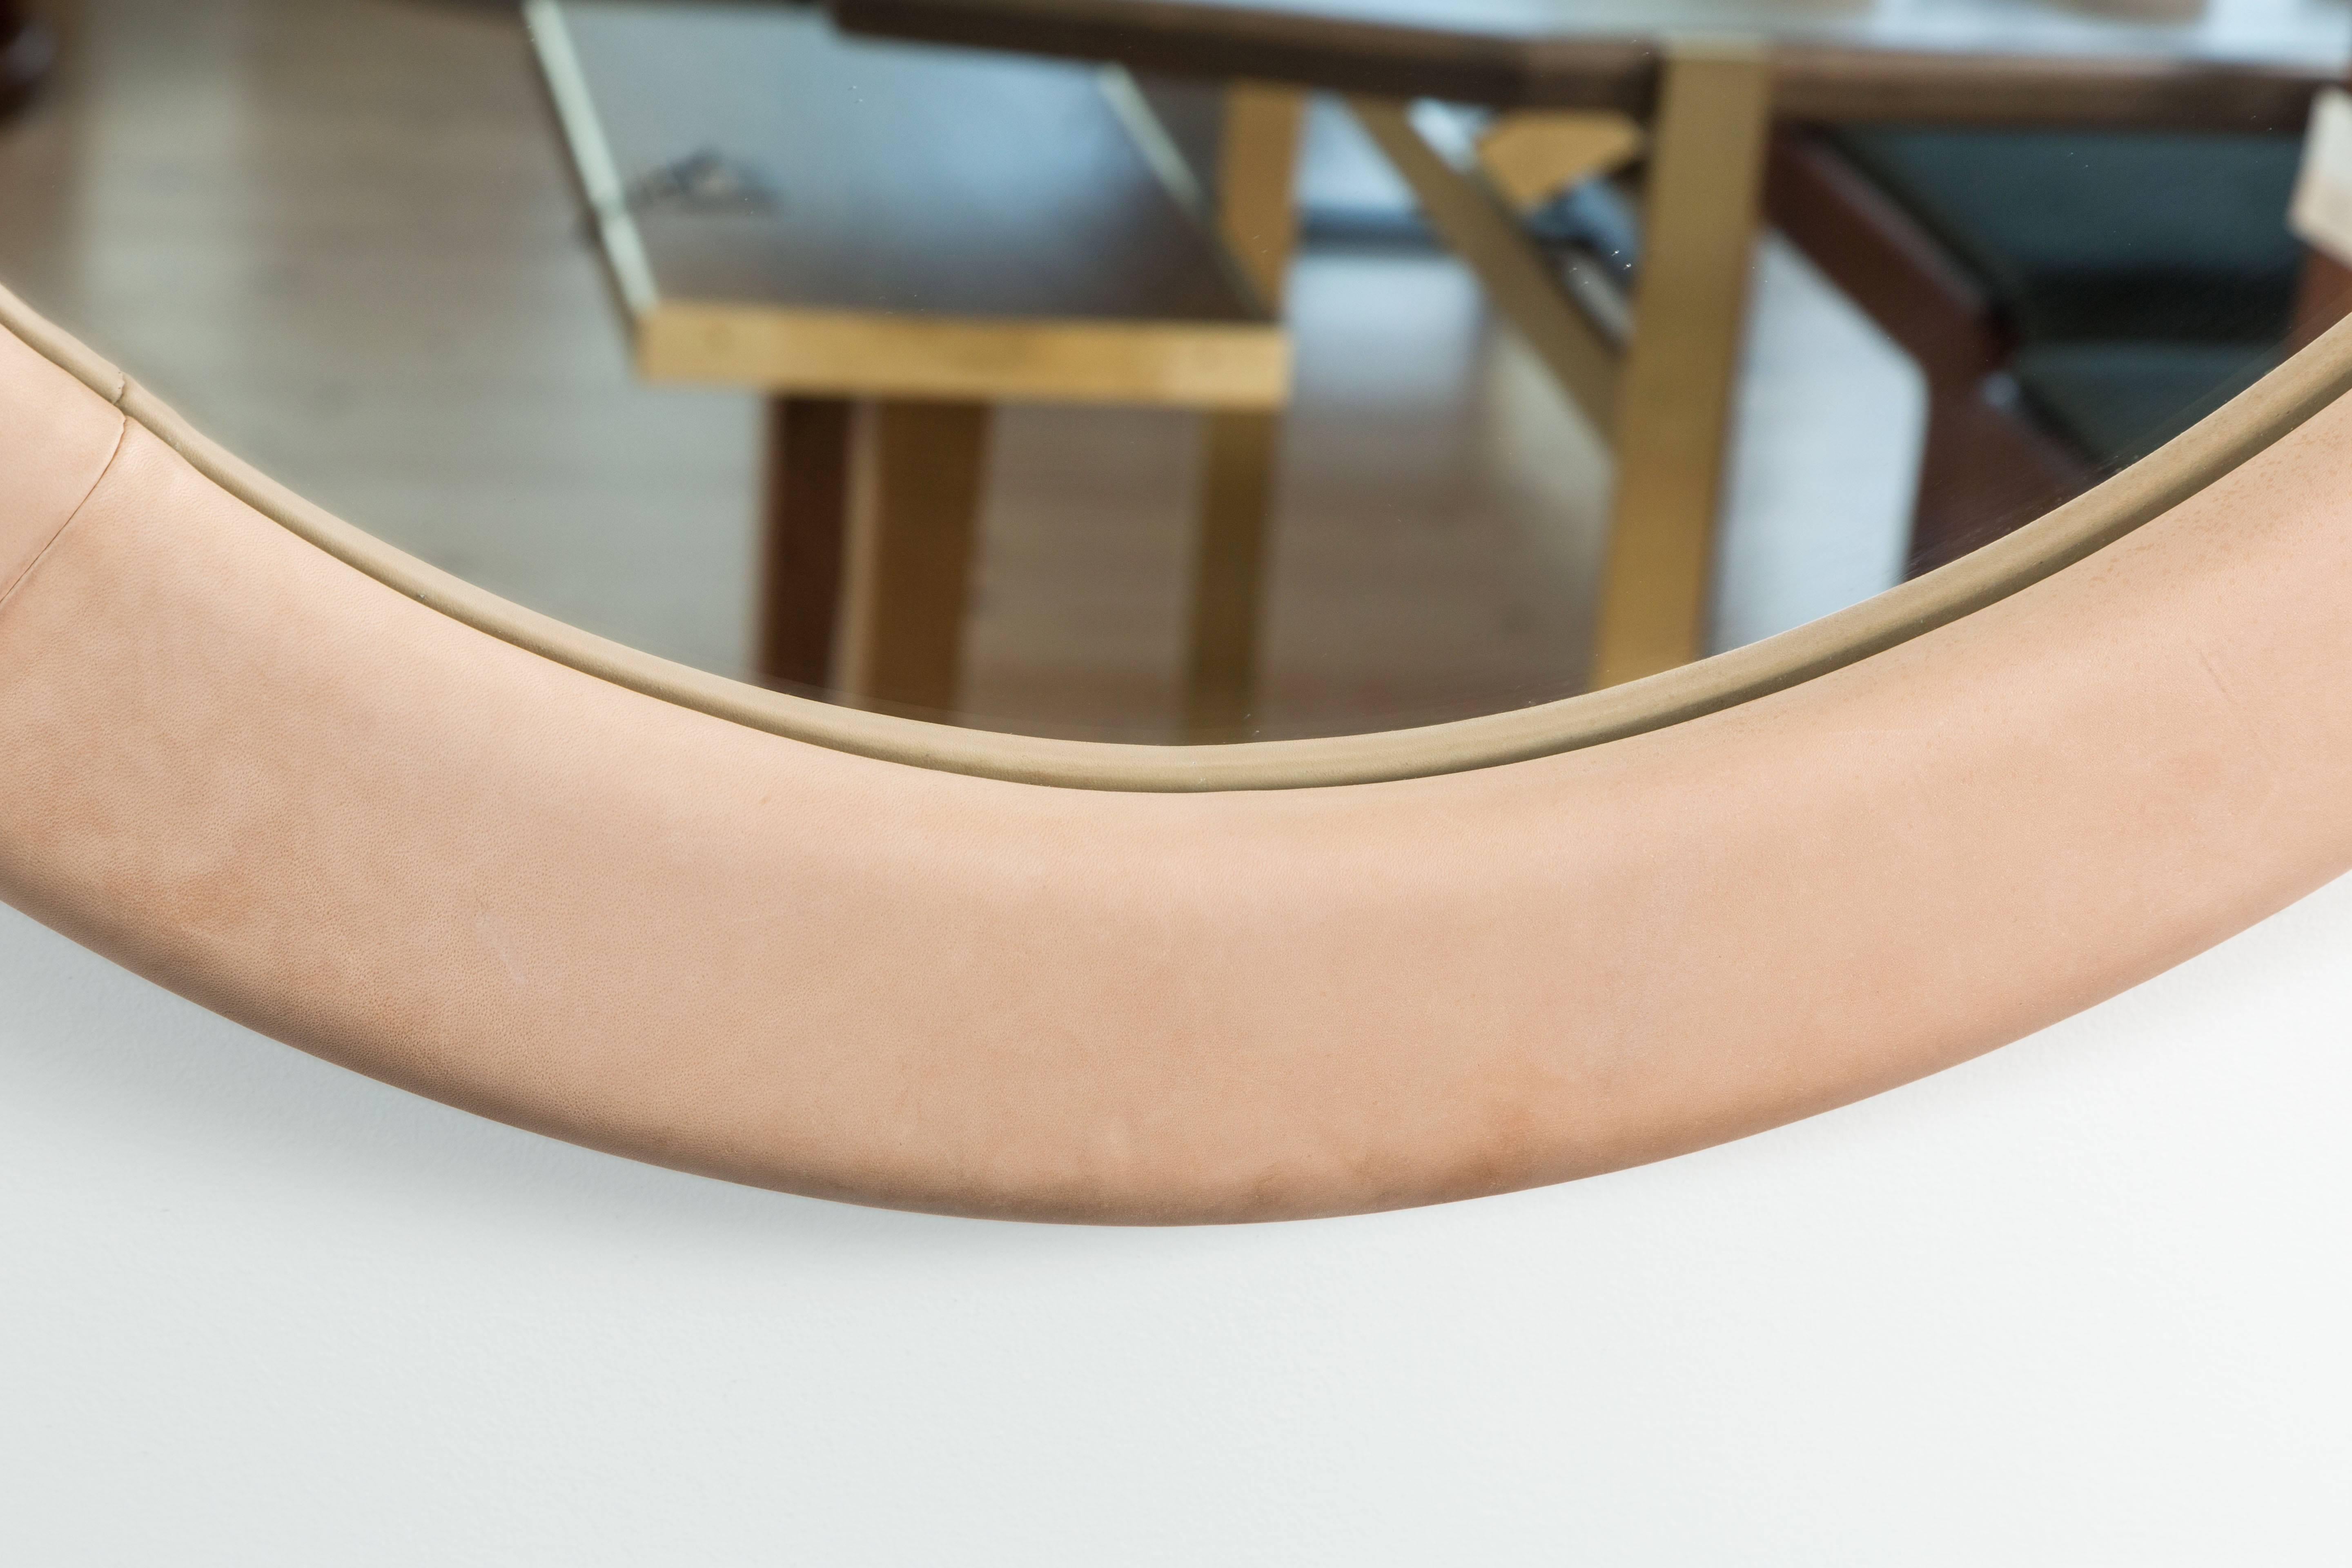 Contemporary Leather Oval Mirror by Jason Koharik for Collected by